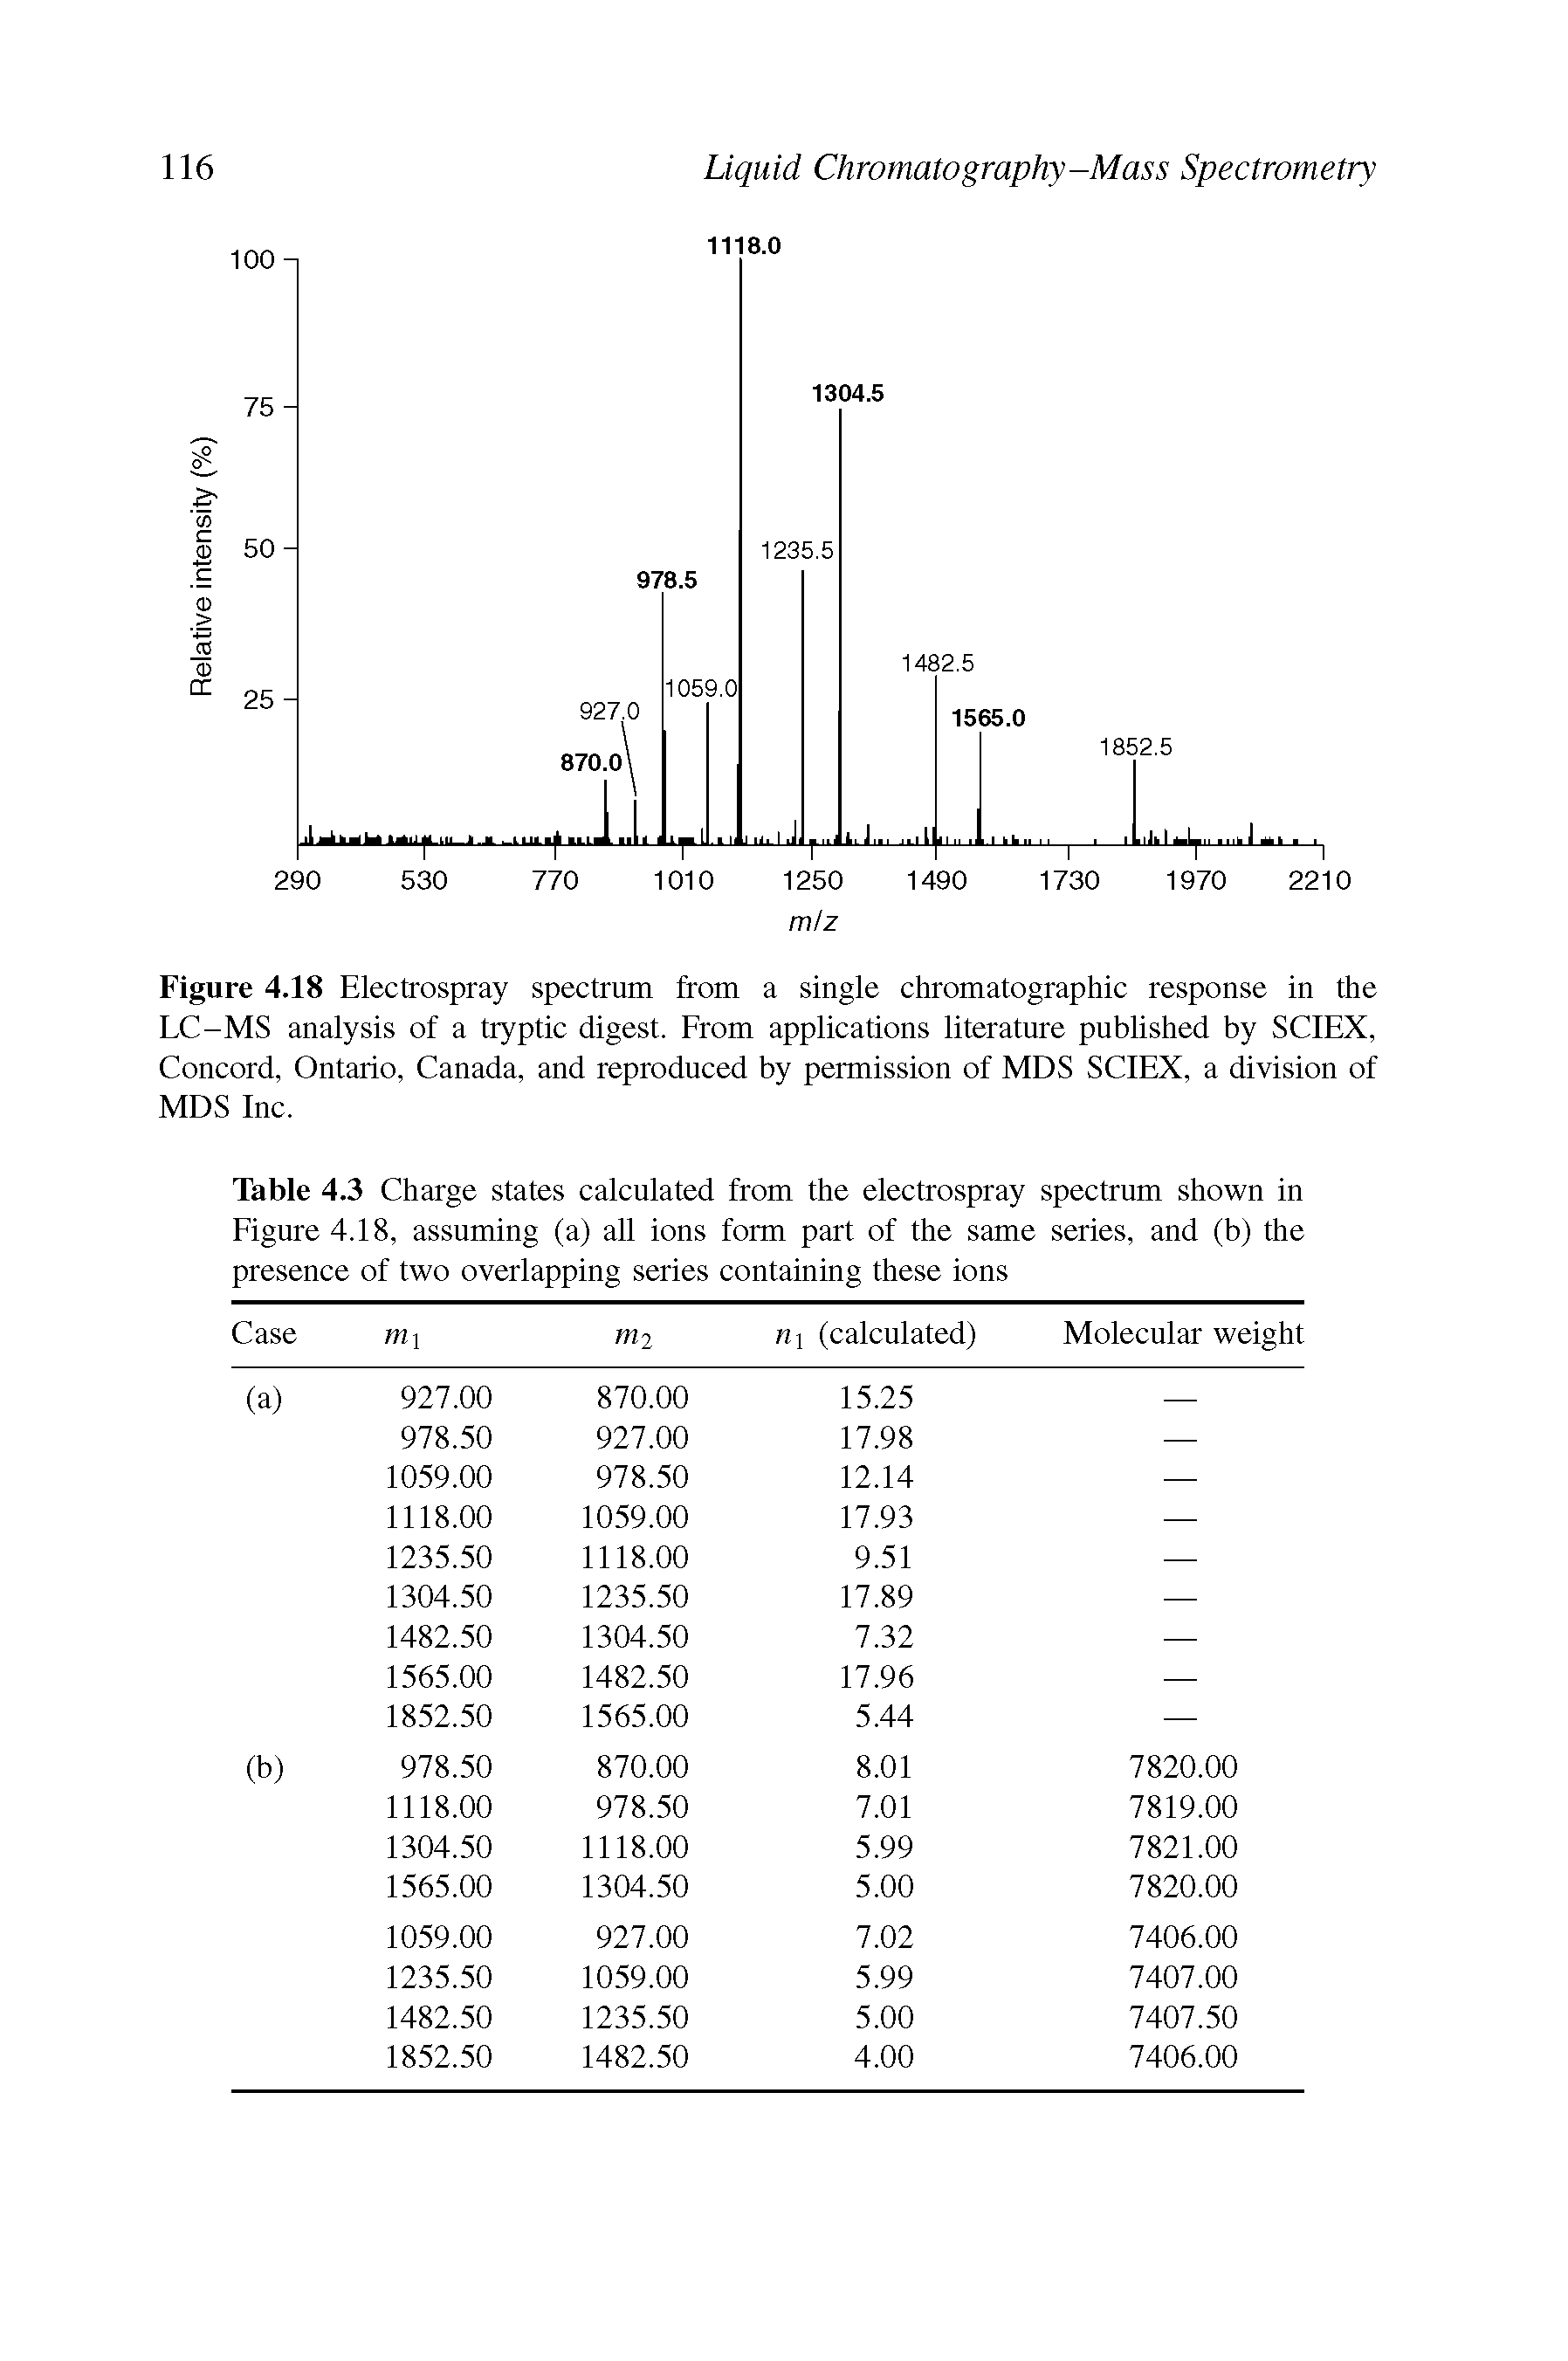 Figure 4.18 Electrospray spectrum from a single chromatographic response in the LC-MS analysis of a tryptic digest. From applications literature published by SCIEX, Concord, Ontario, Canada, and reproduced by permission of MDS SCIEX, a division of MDS Inc.